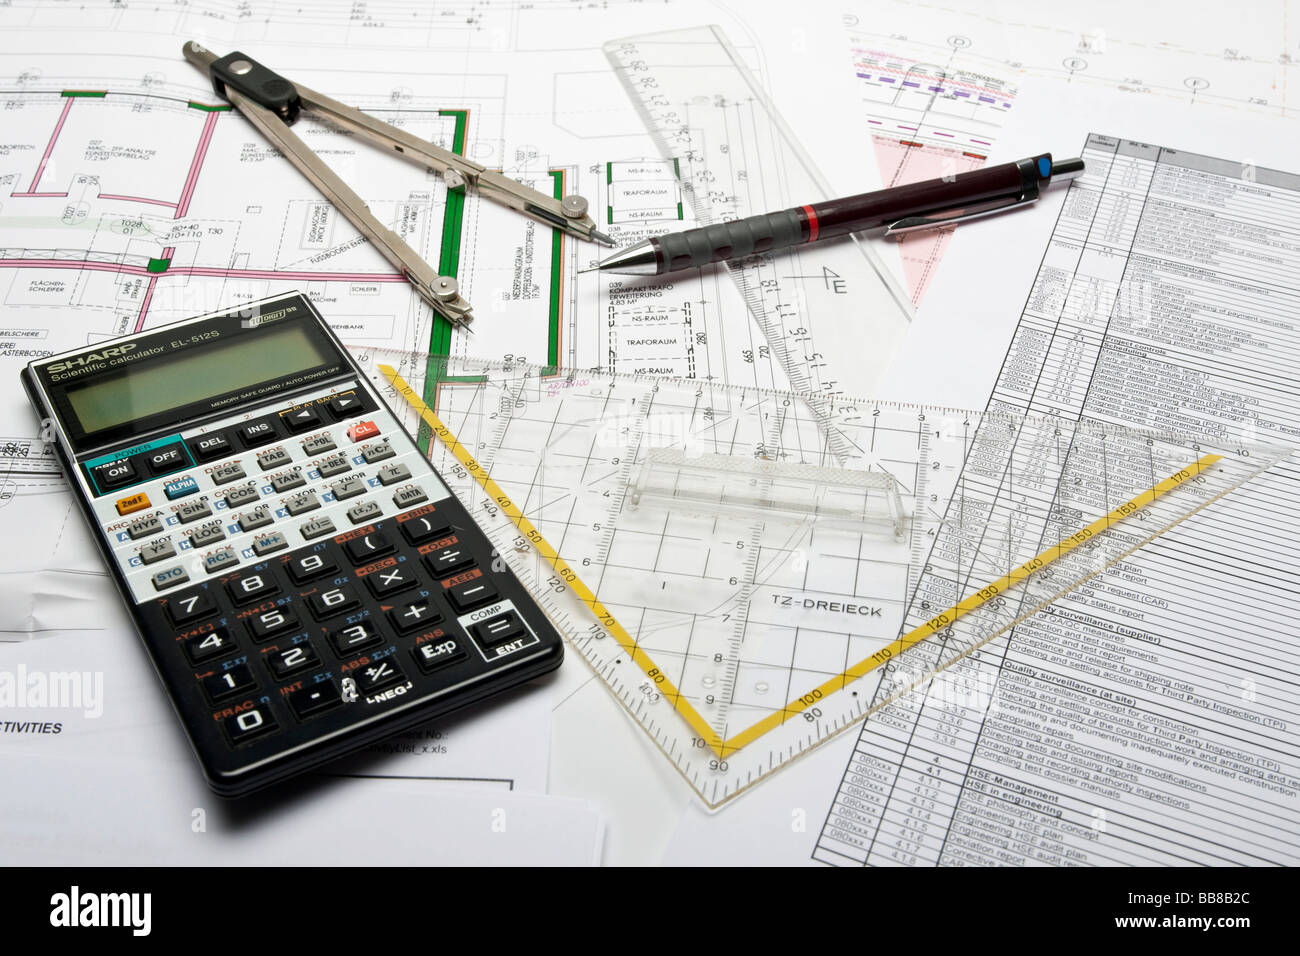 Project planning, construction plan with pocket calculator, compass, mechanical pencil, ruler, triangle and check list Stock Photo